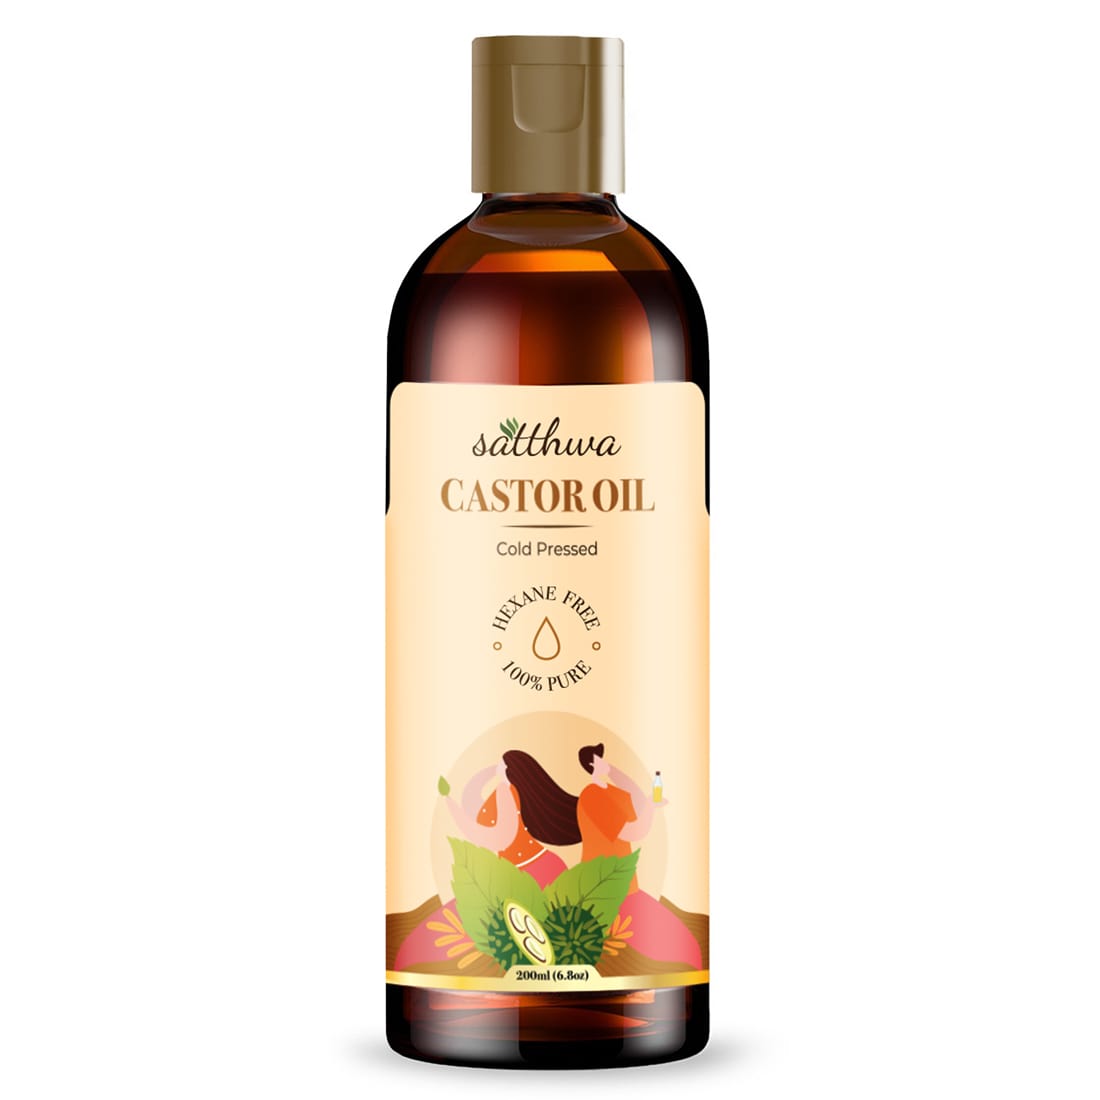 Mamaearth 100% Pure Cold Pressed Castor Oil, 150 ml Price, Uses, Side  Effects, Composition - Apollo Pharmacy